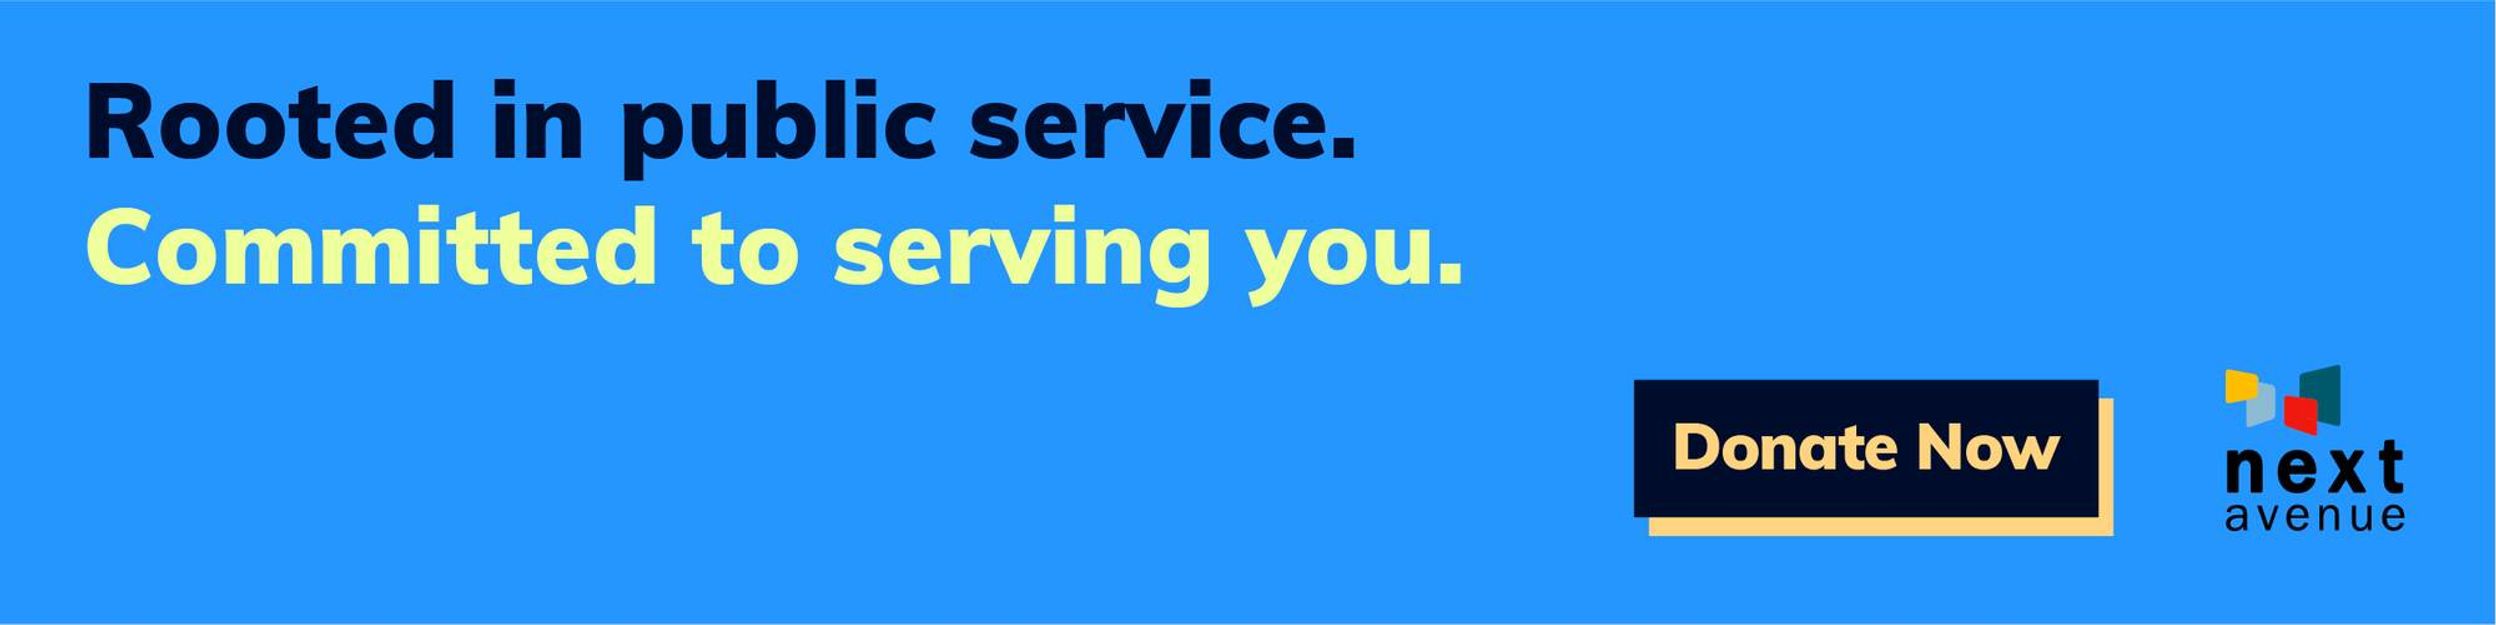 A graphic that reads, "Rooted in public service. Committed to serving you. Donate Now" for Next Avenue's membership campaign.